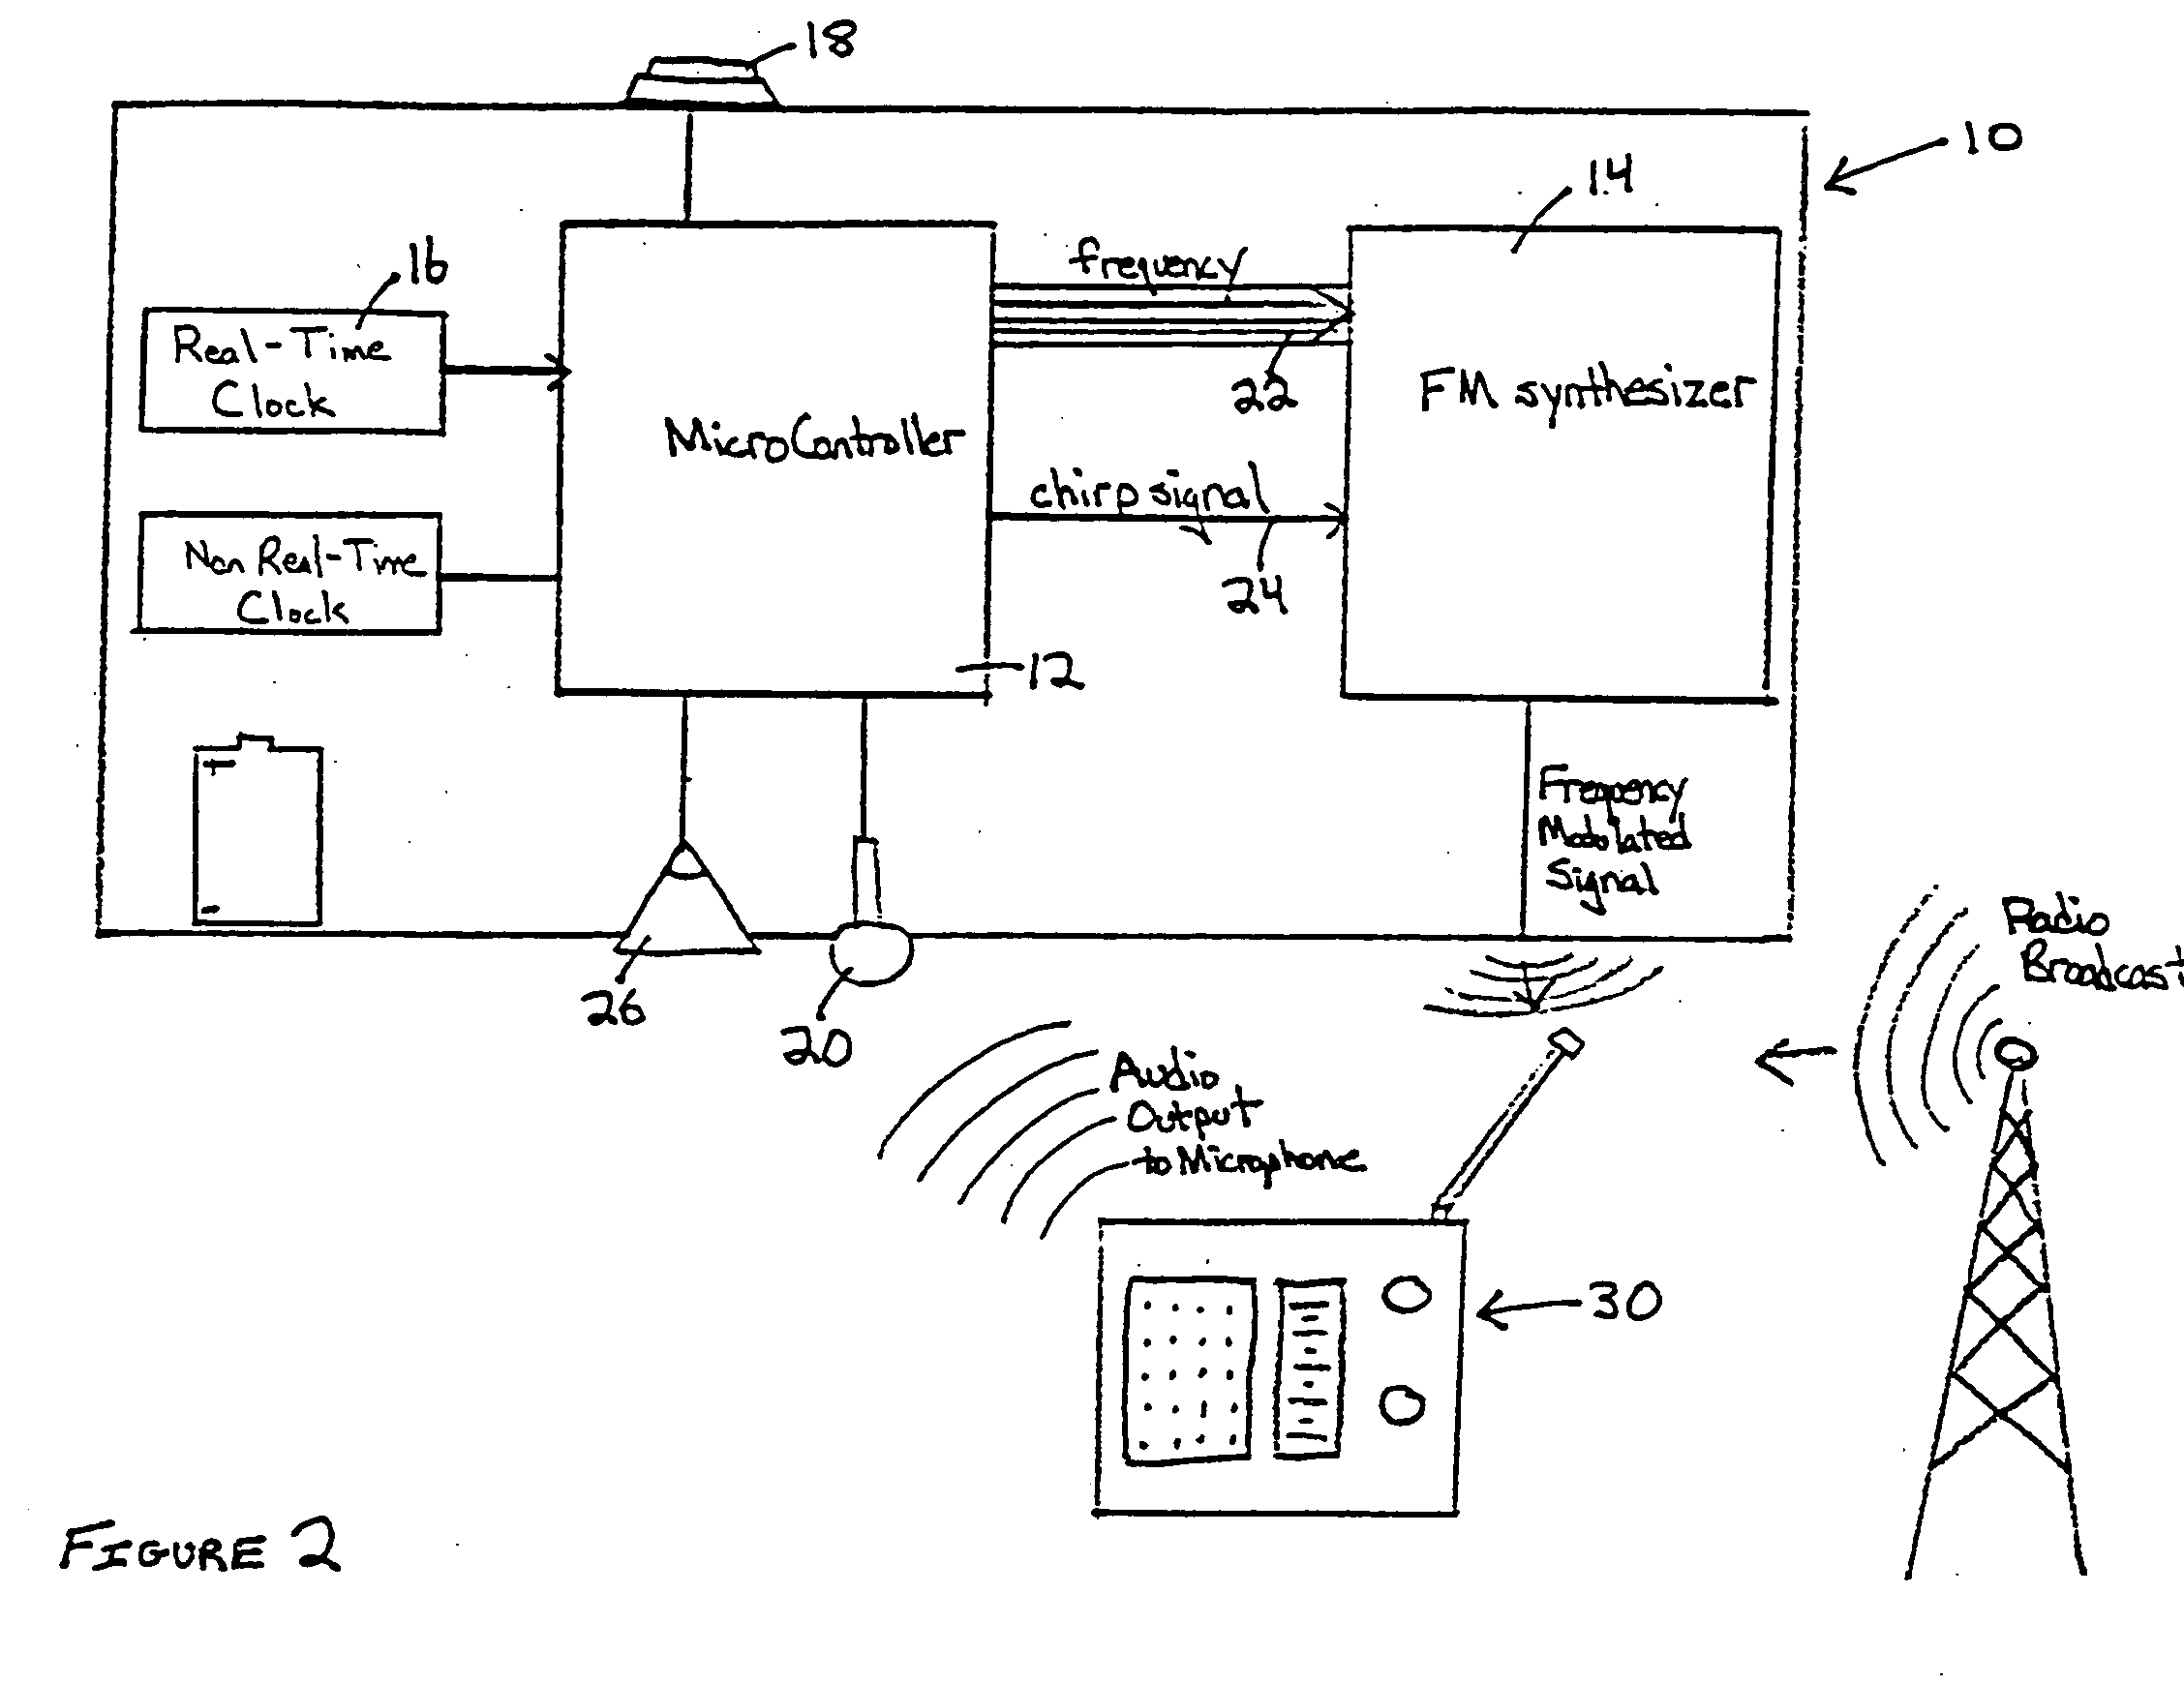 Method and system for identifying data locations associated with real world observations